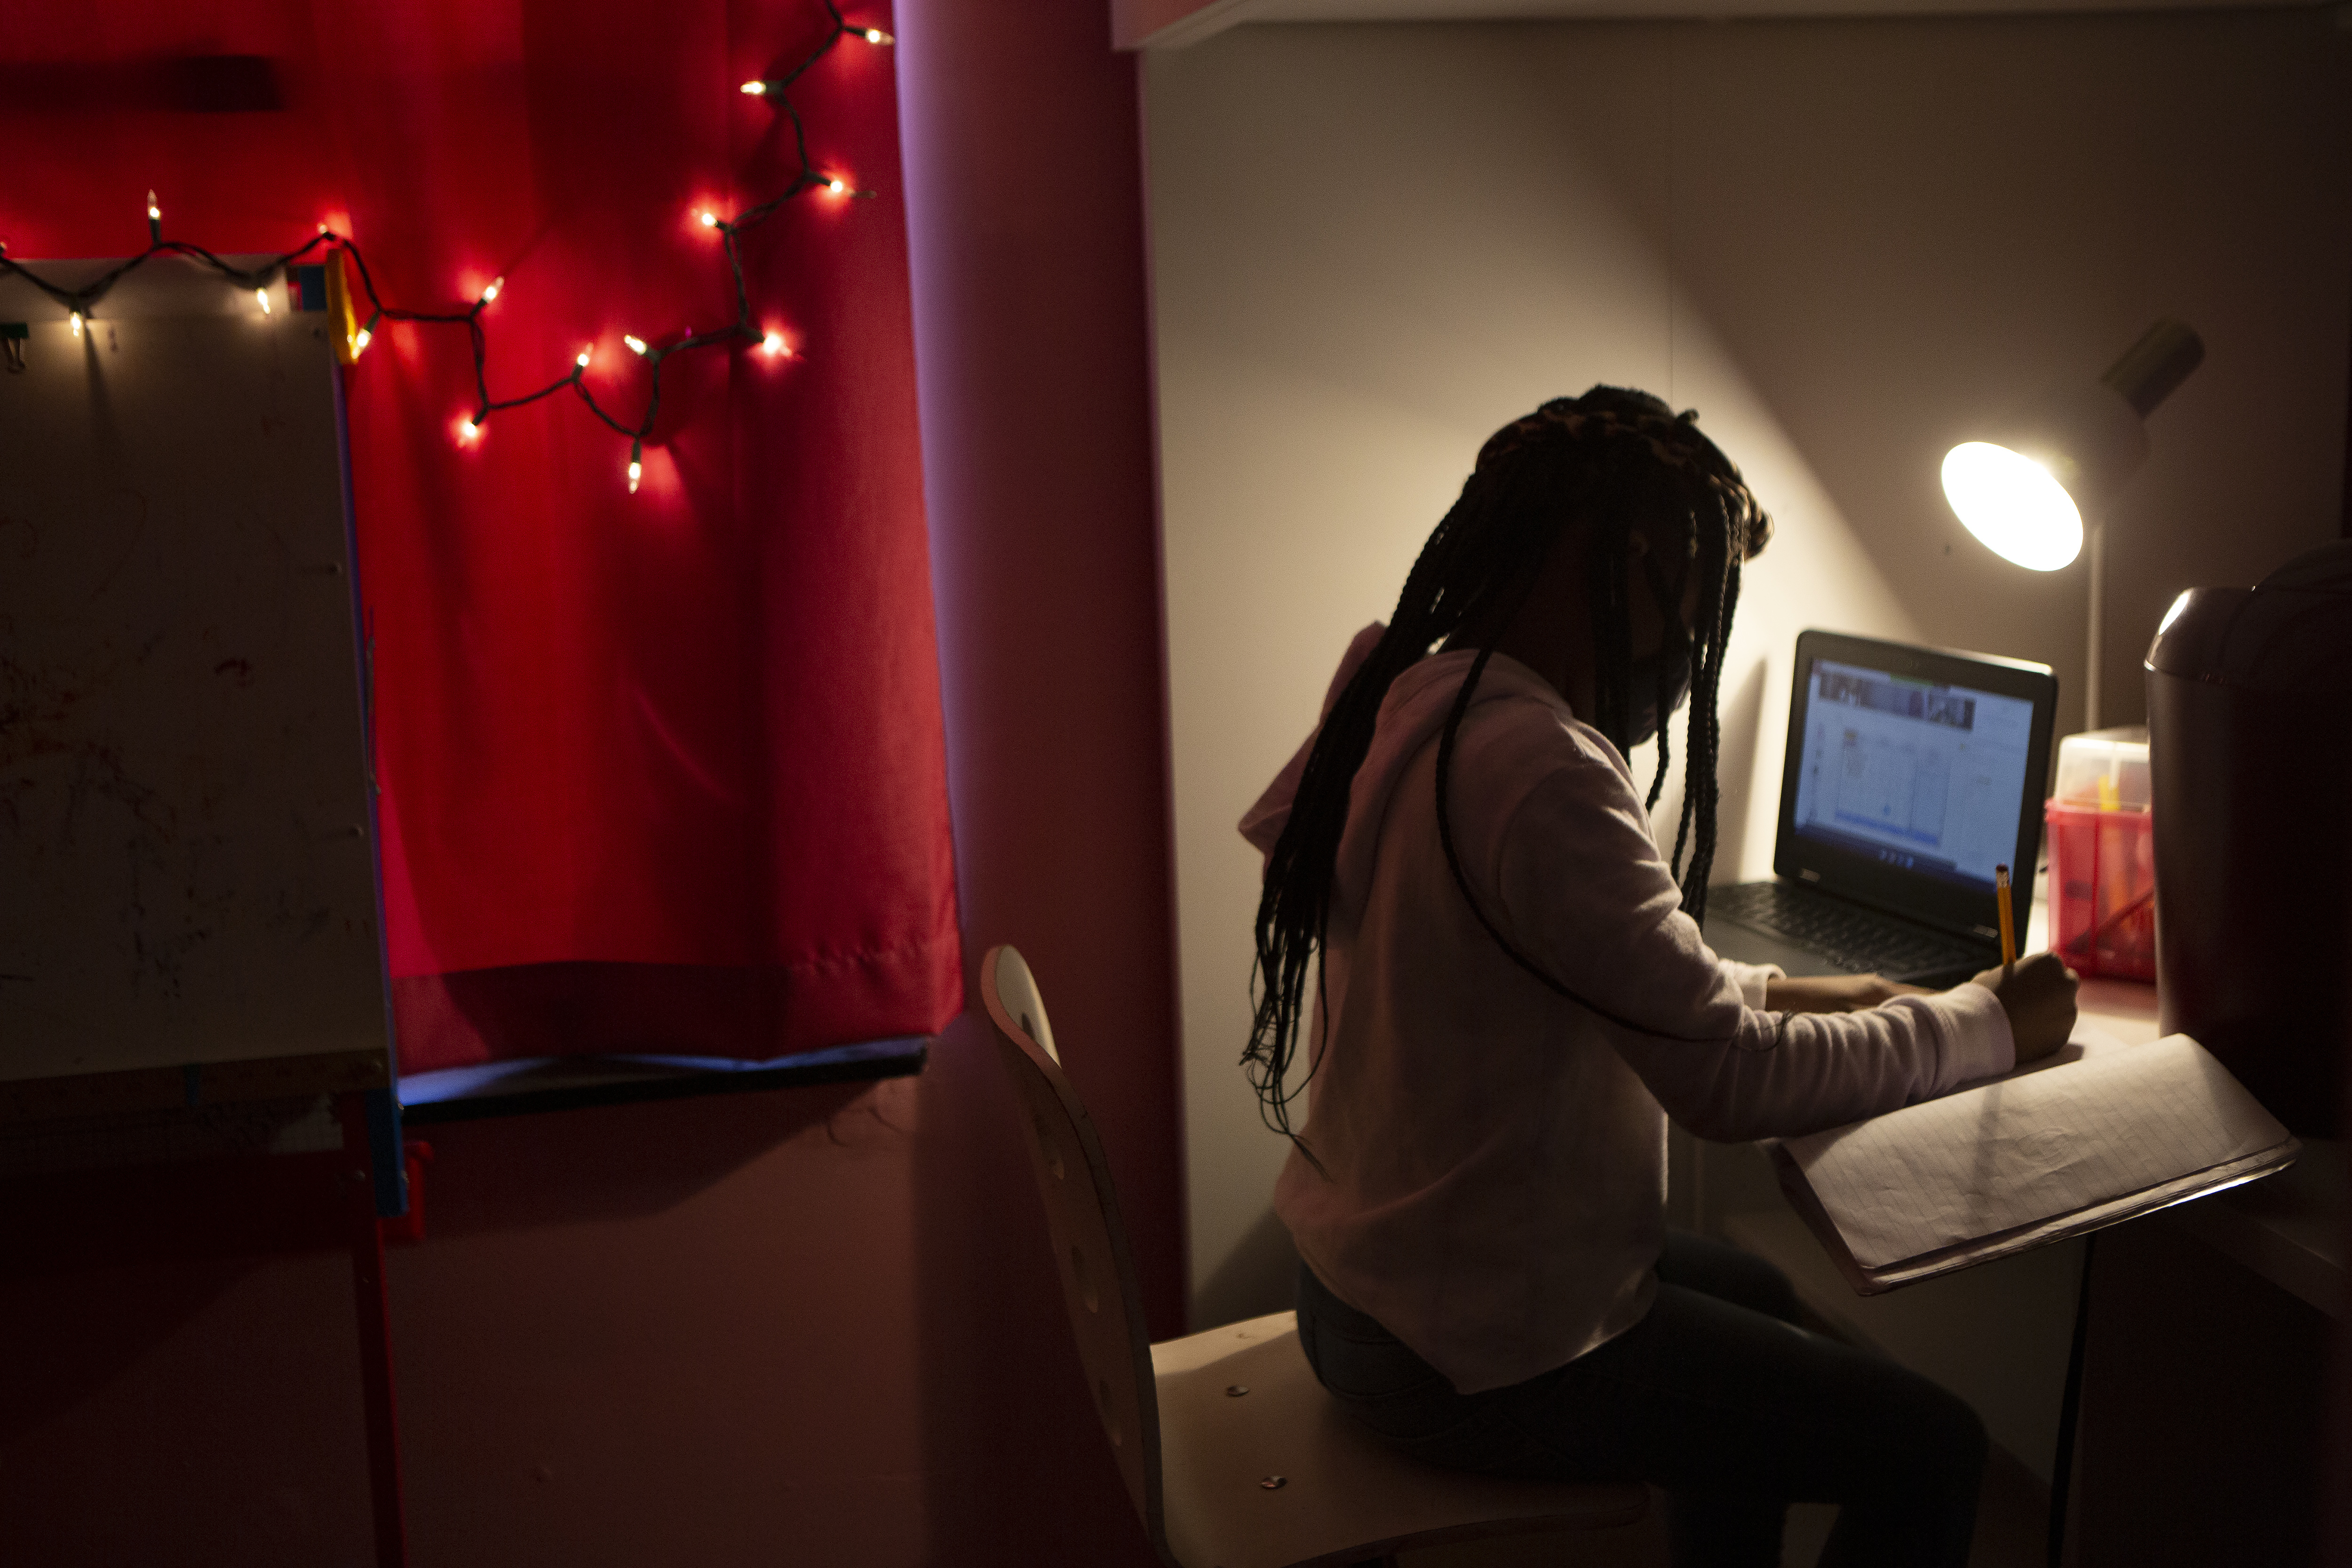 A young girl in a darkened room works in the light of a desk lamp. She is writing in a notebook. A laptop computer is open on her left. Behind her a string of Christmas lights hang over a red curtain.